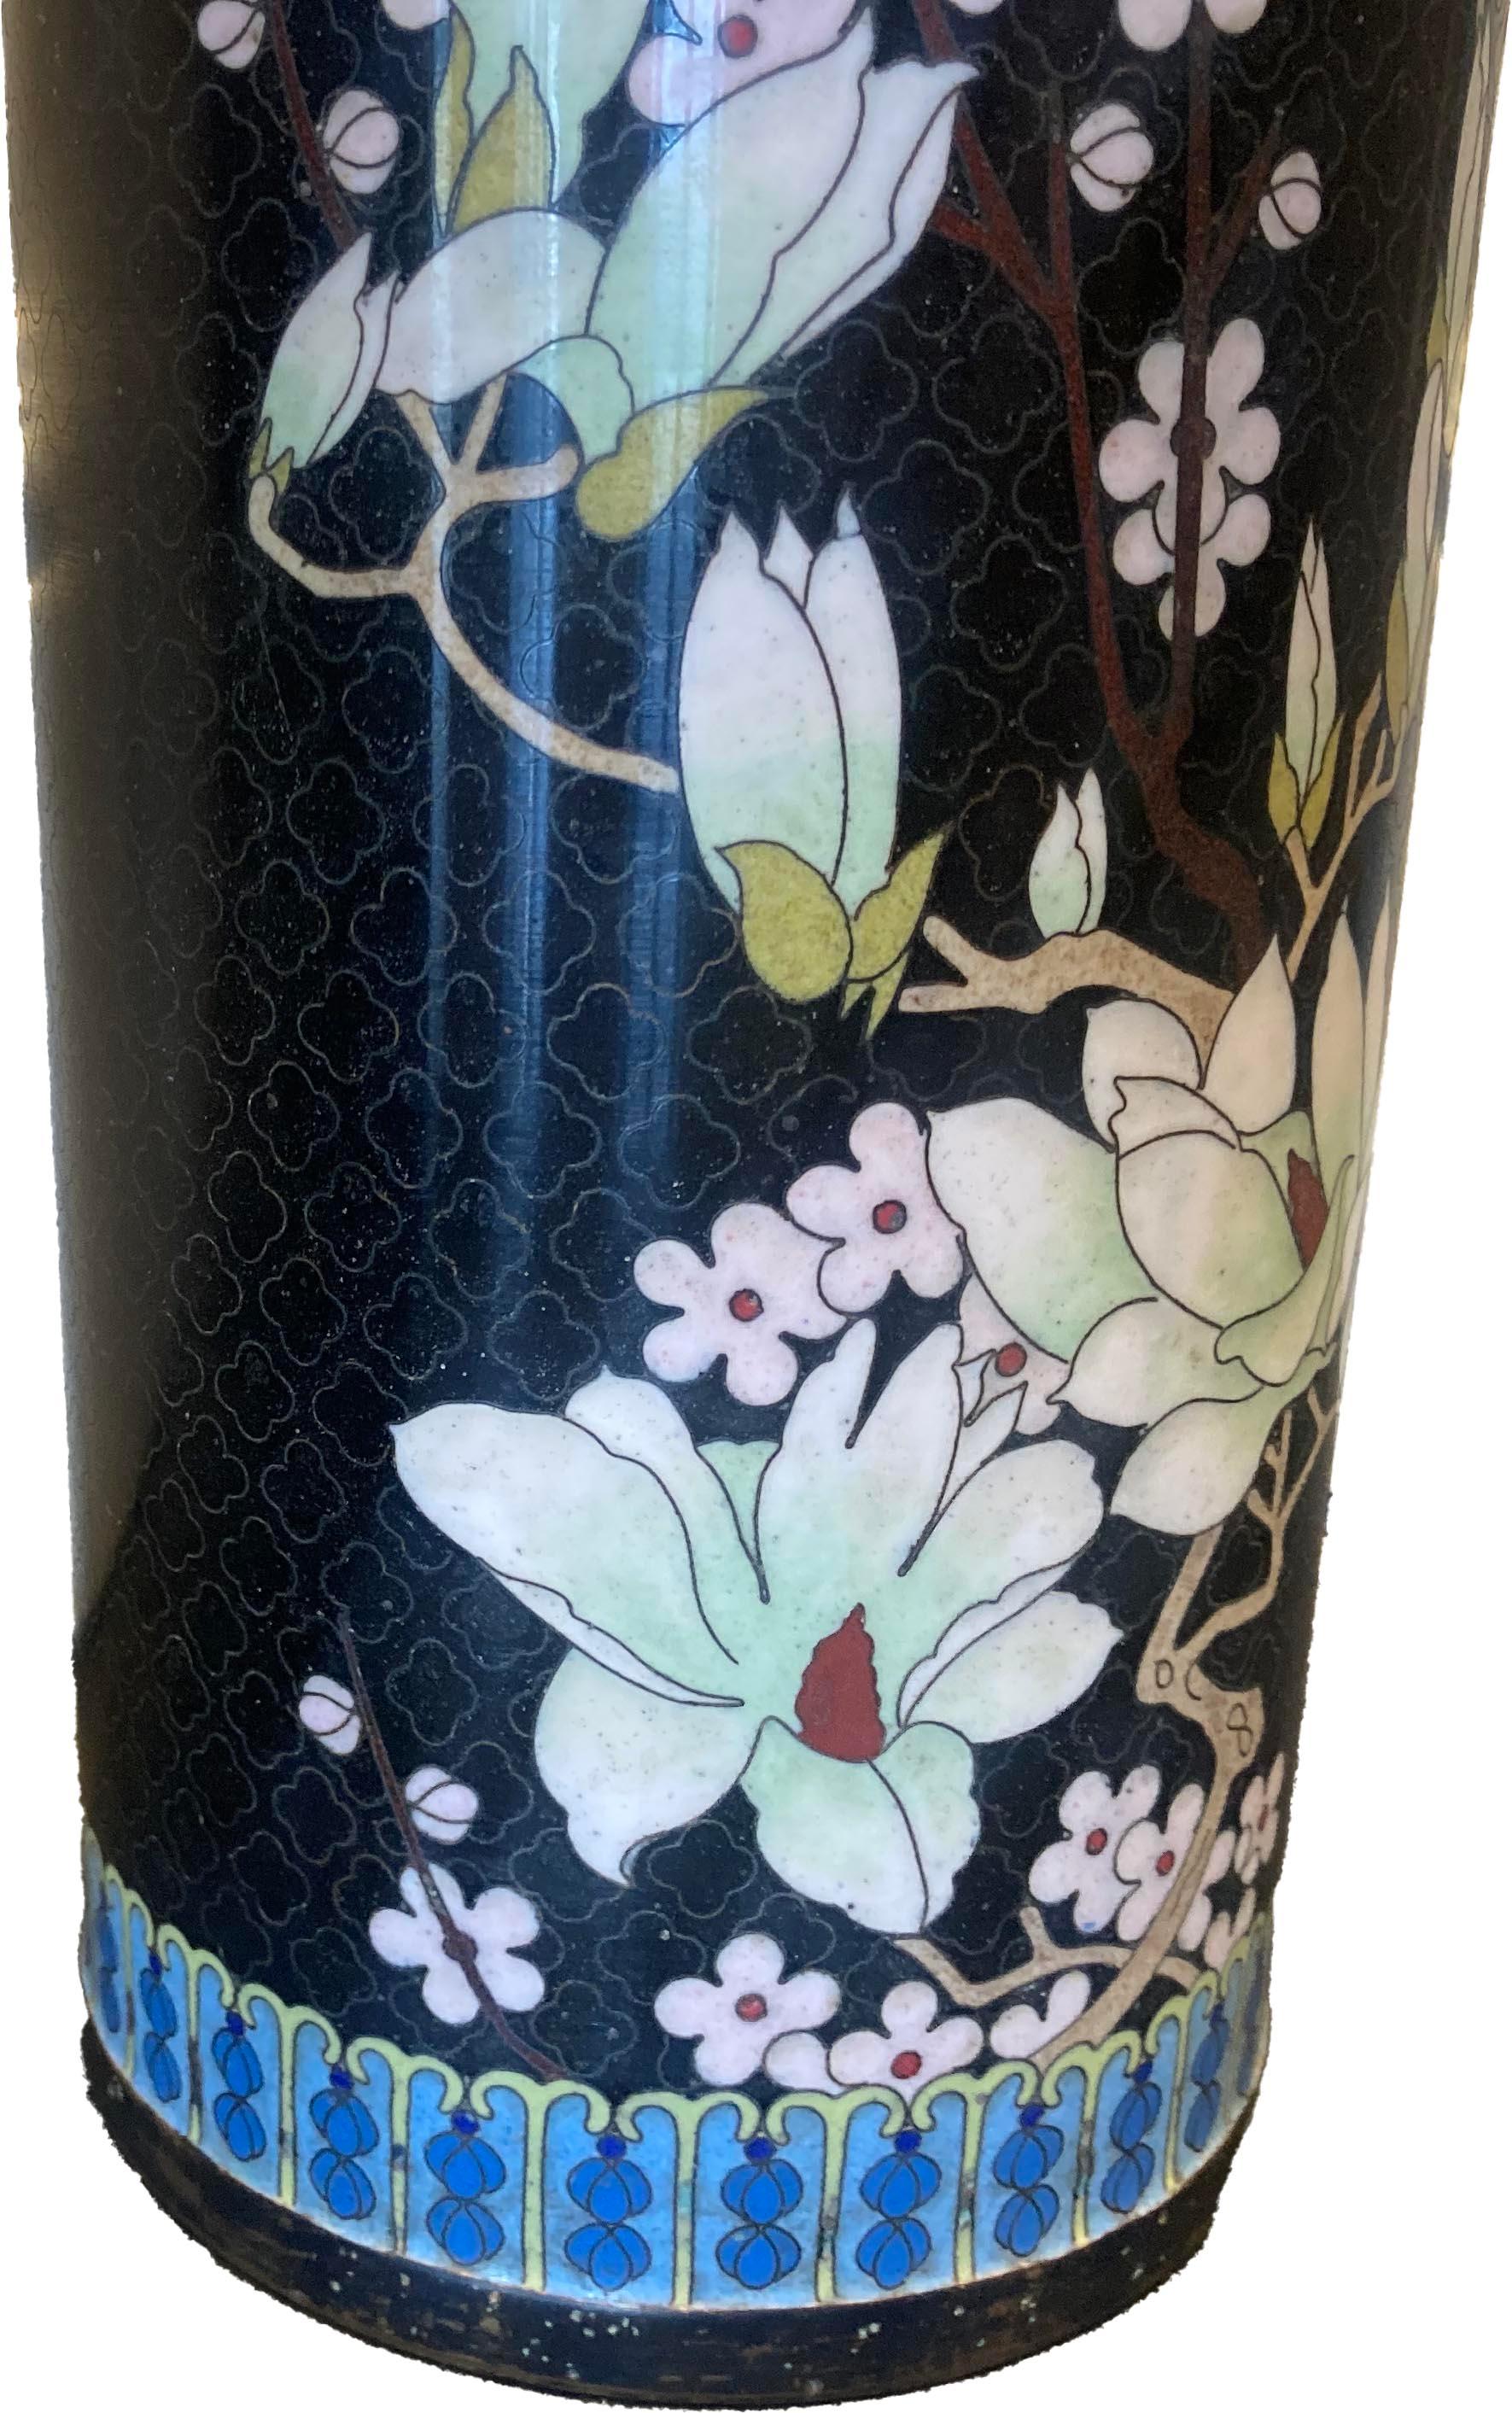 Pair of unique black chinese Cloisonné vases with floral design and traditional ruyi decorative border at the top. Blue enamel interior.